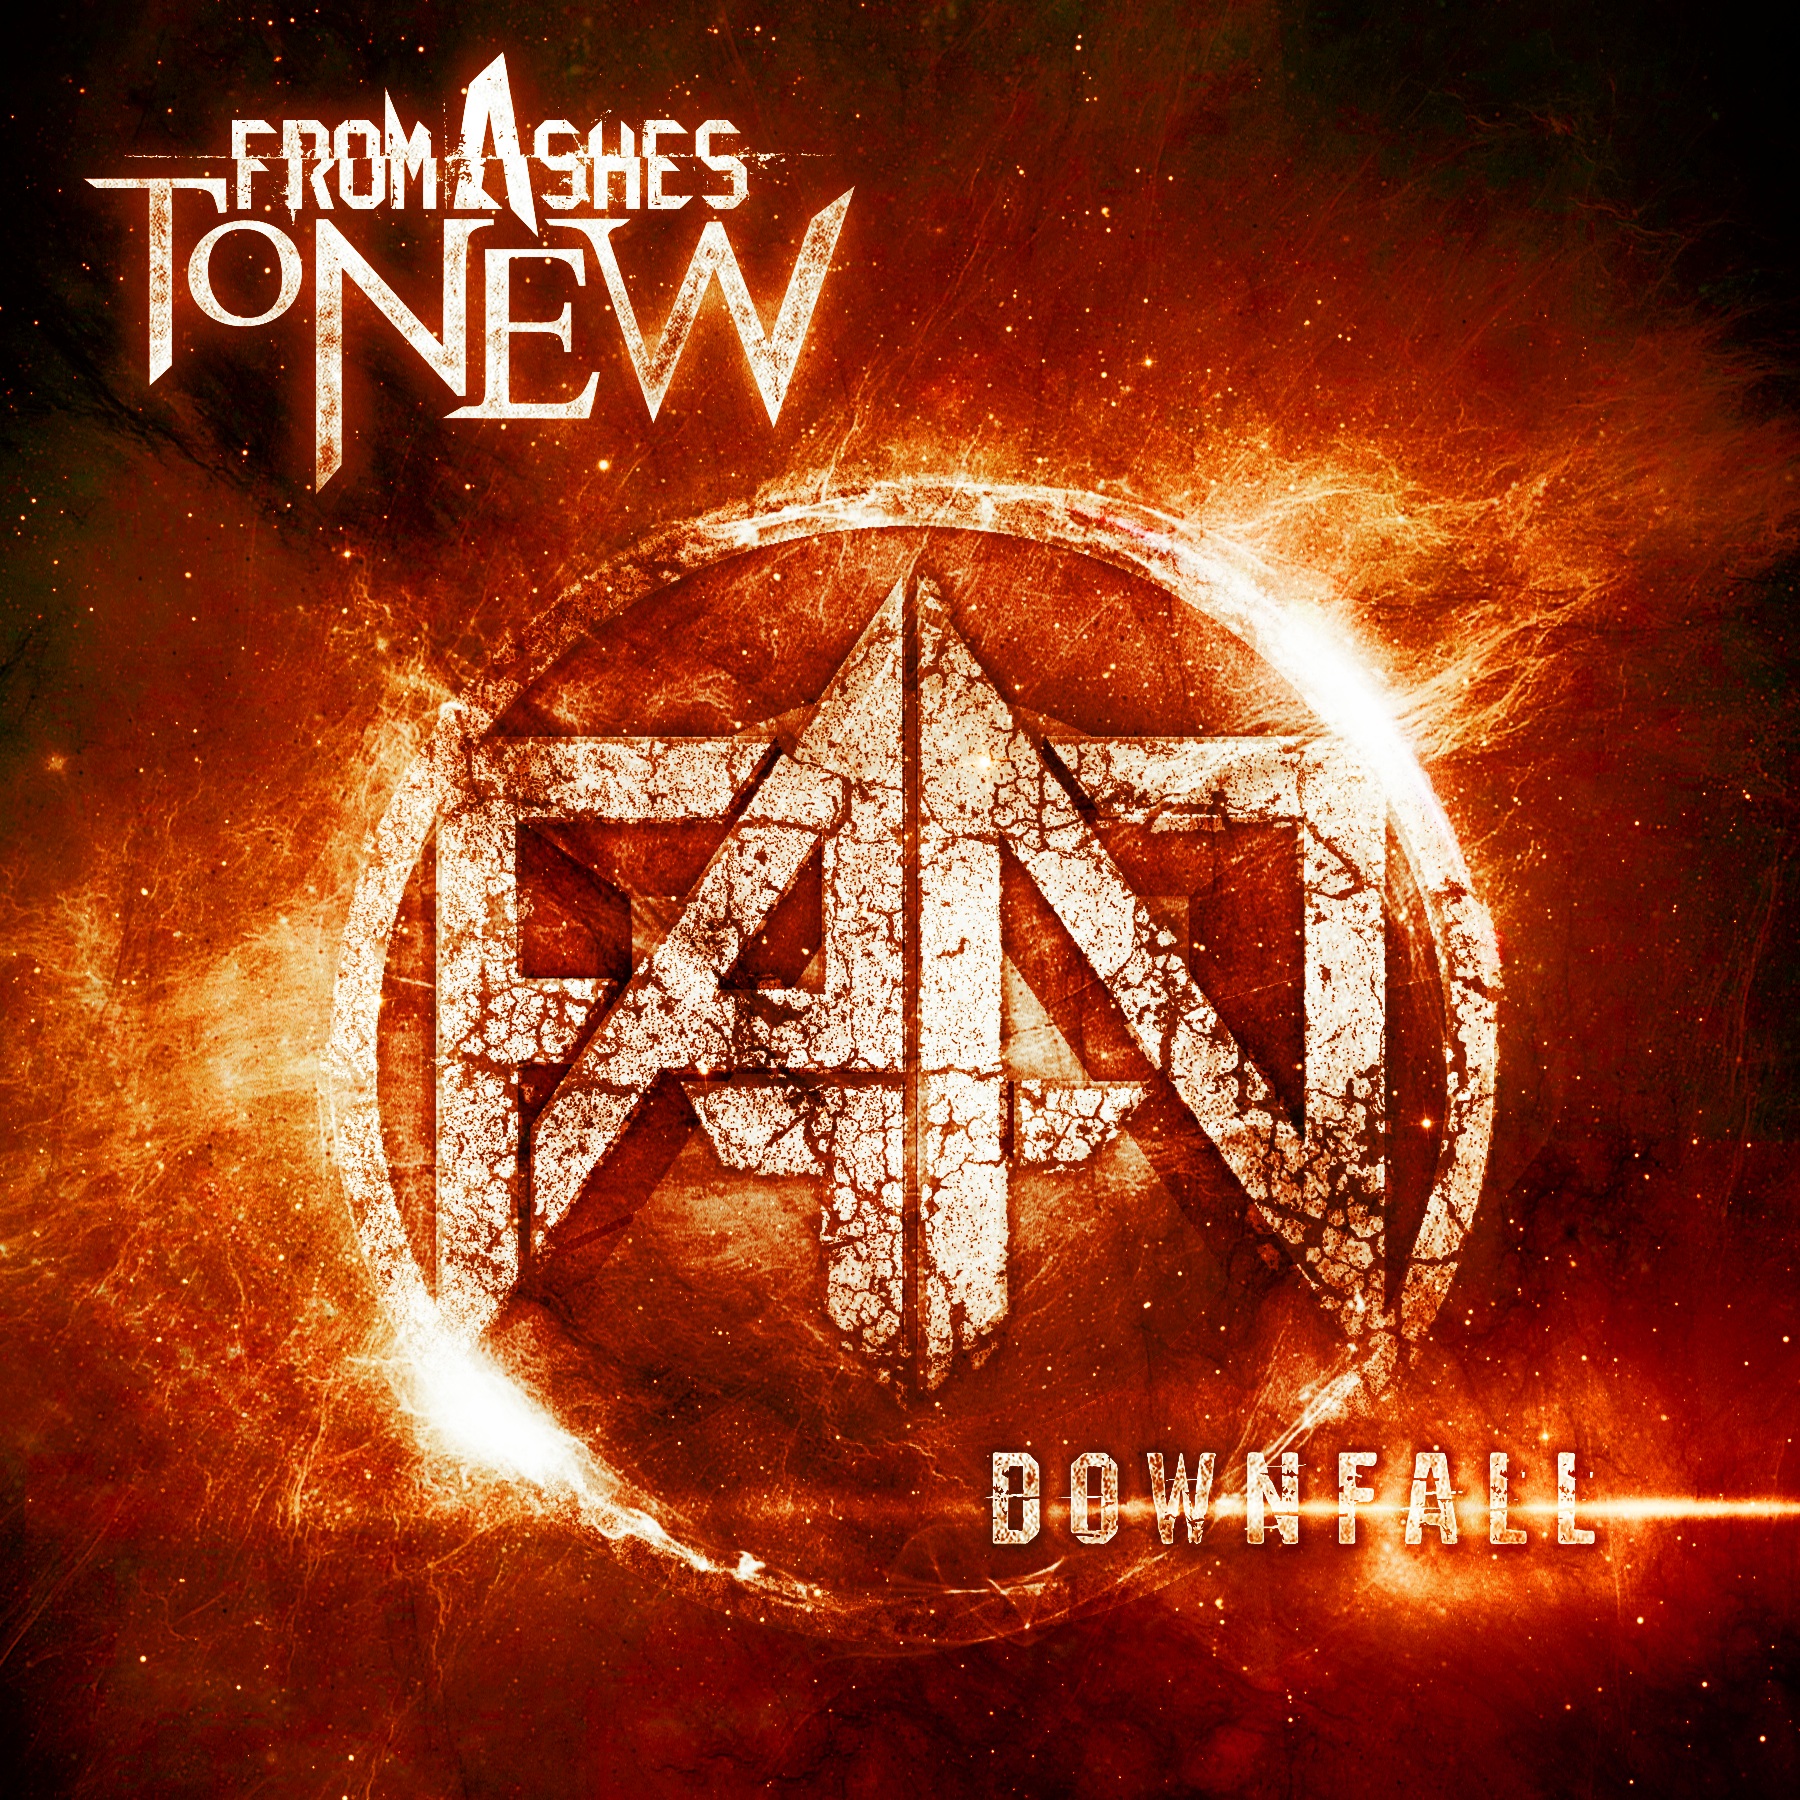 From Ashes To New Downfall EP